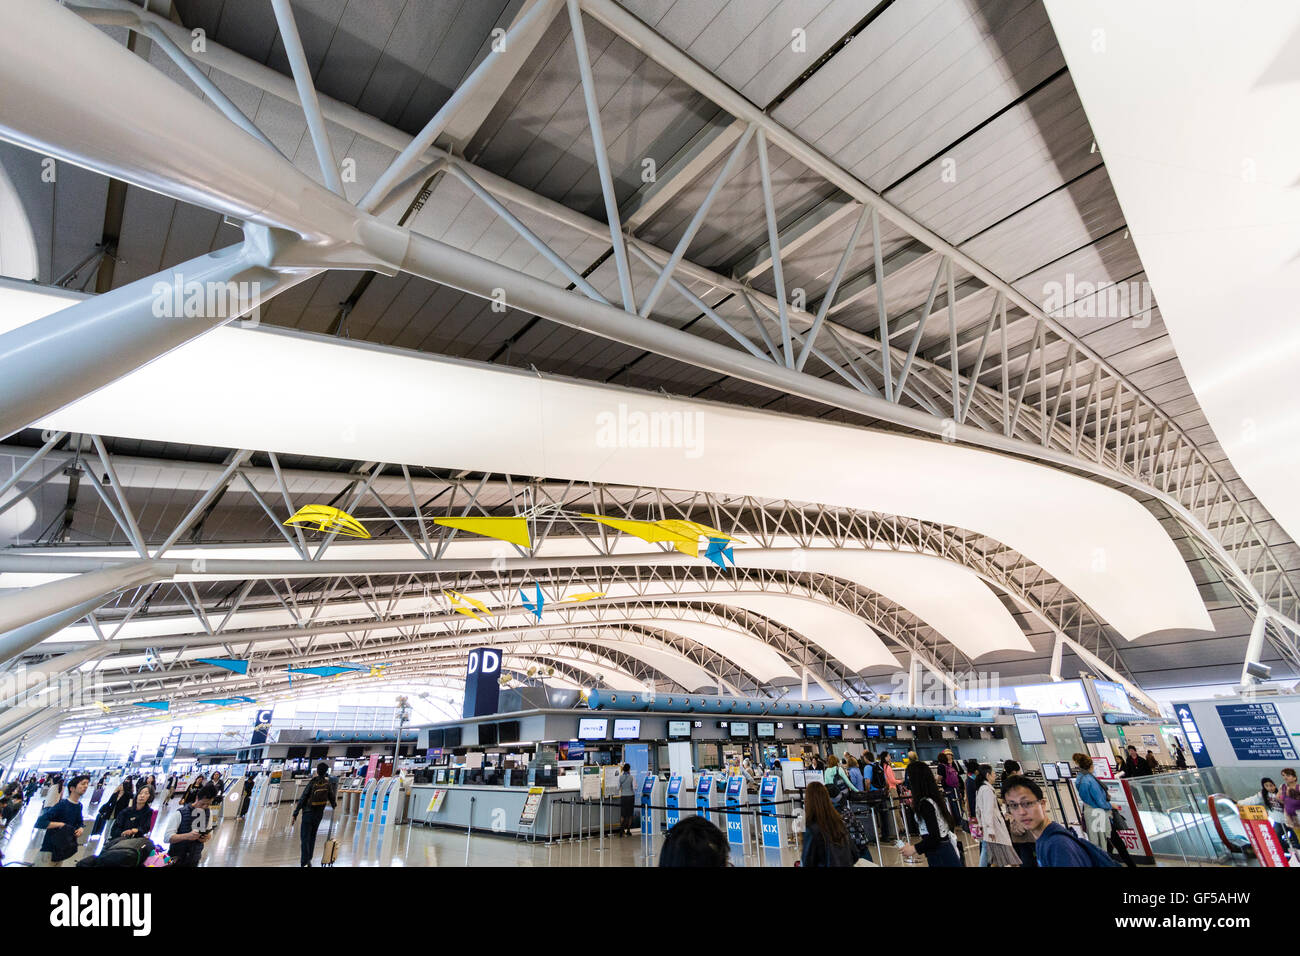 Japan, Kansai airport, KIX. Interior of terminal one building. International check-in. General view of hall with rows of check in desks and people. Stock Photo